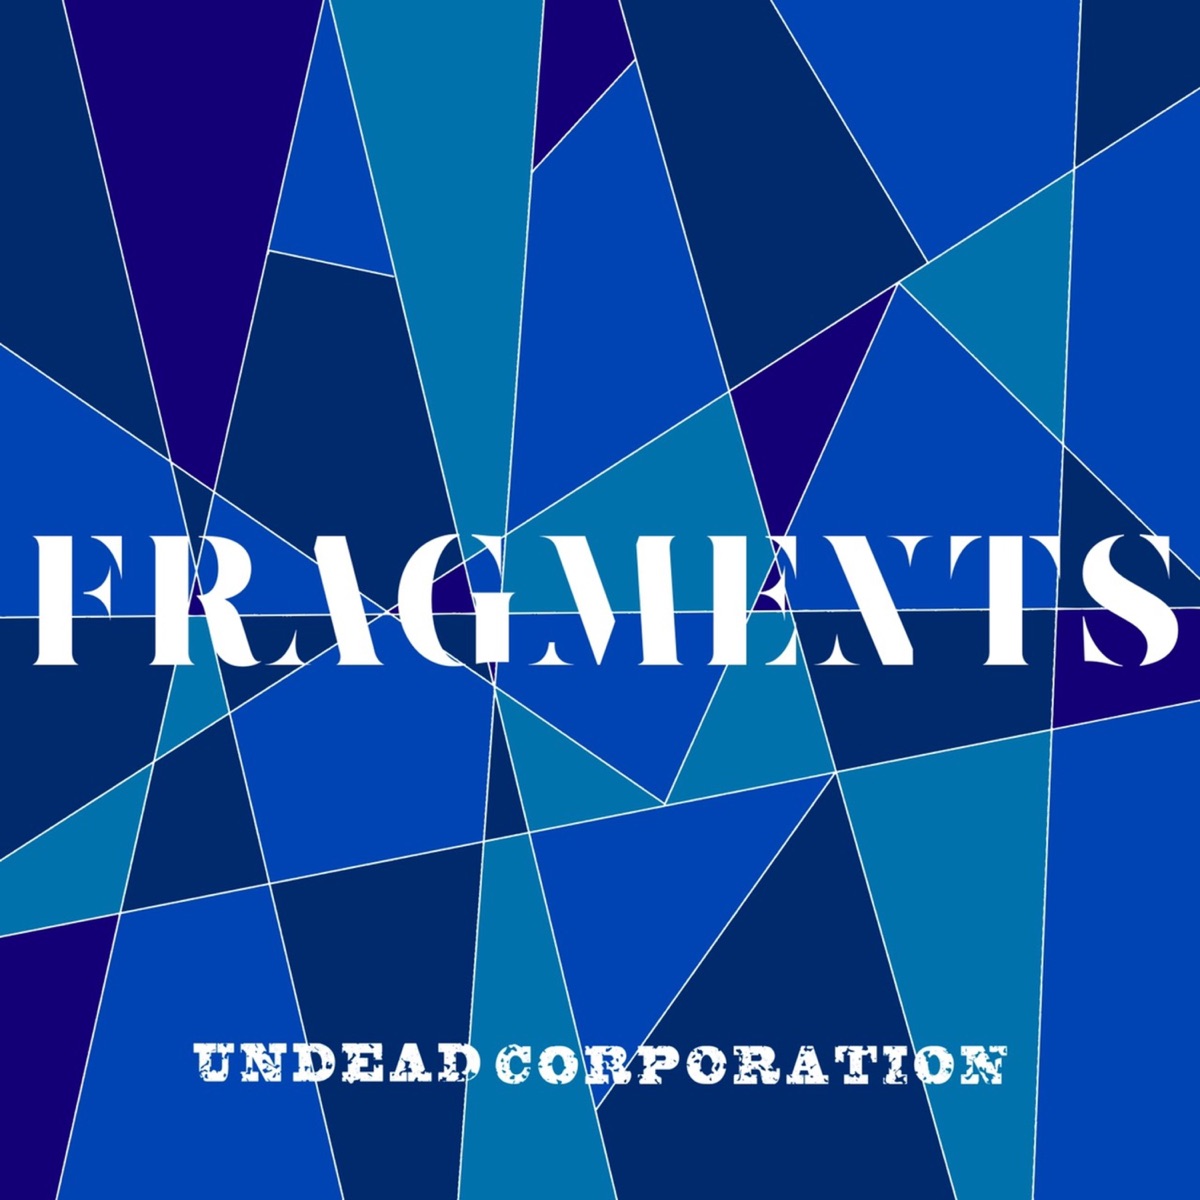 Cover for『UNDEAD CORPORATION - Oblivion』from the release『Fragments』